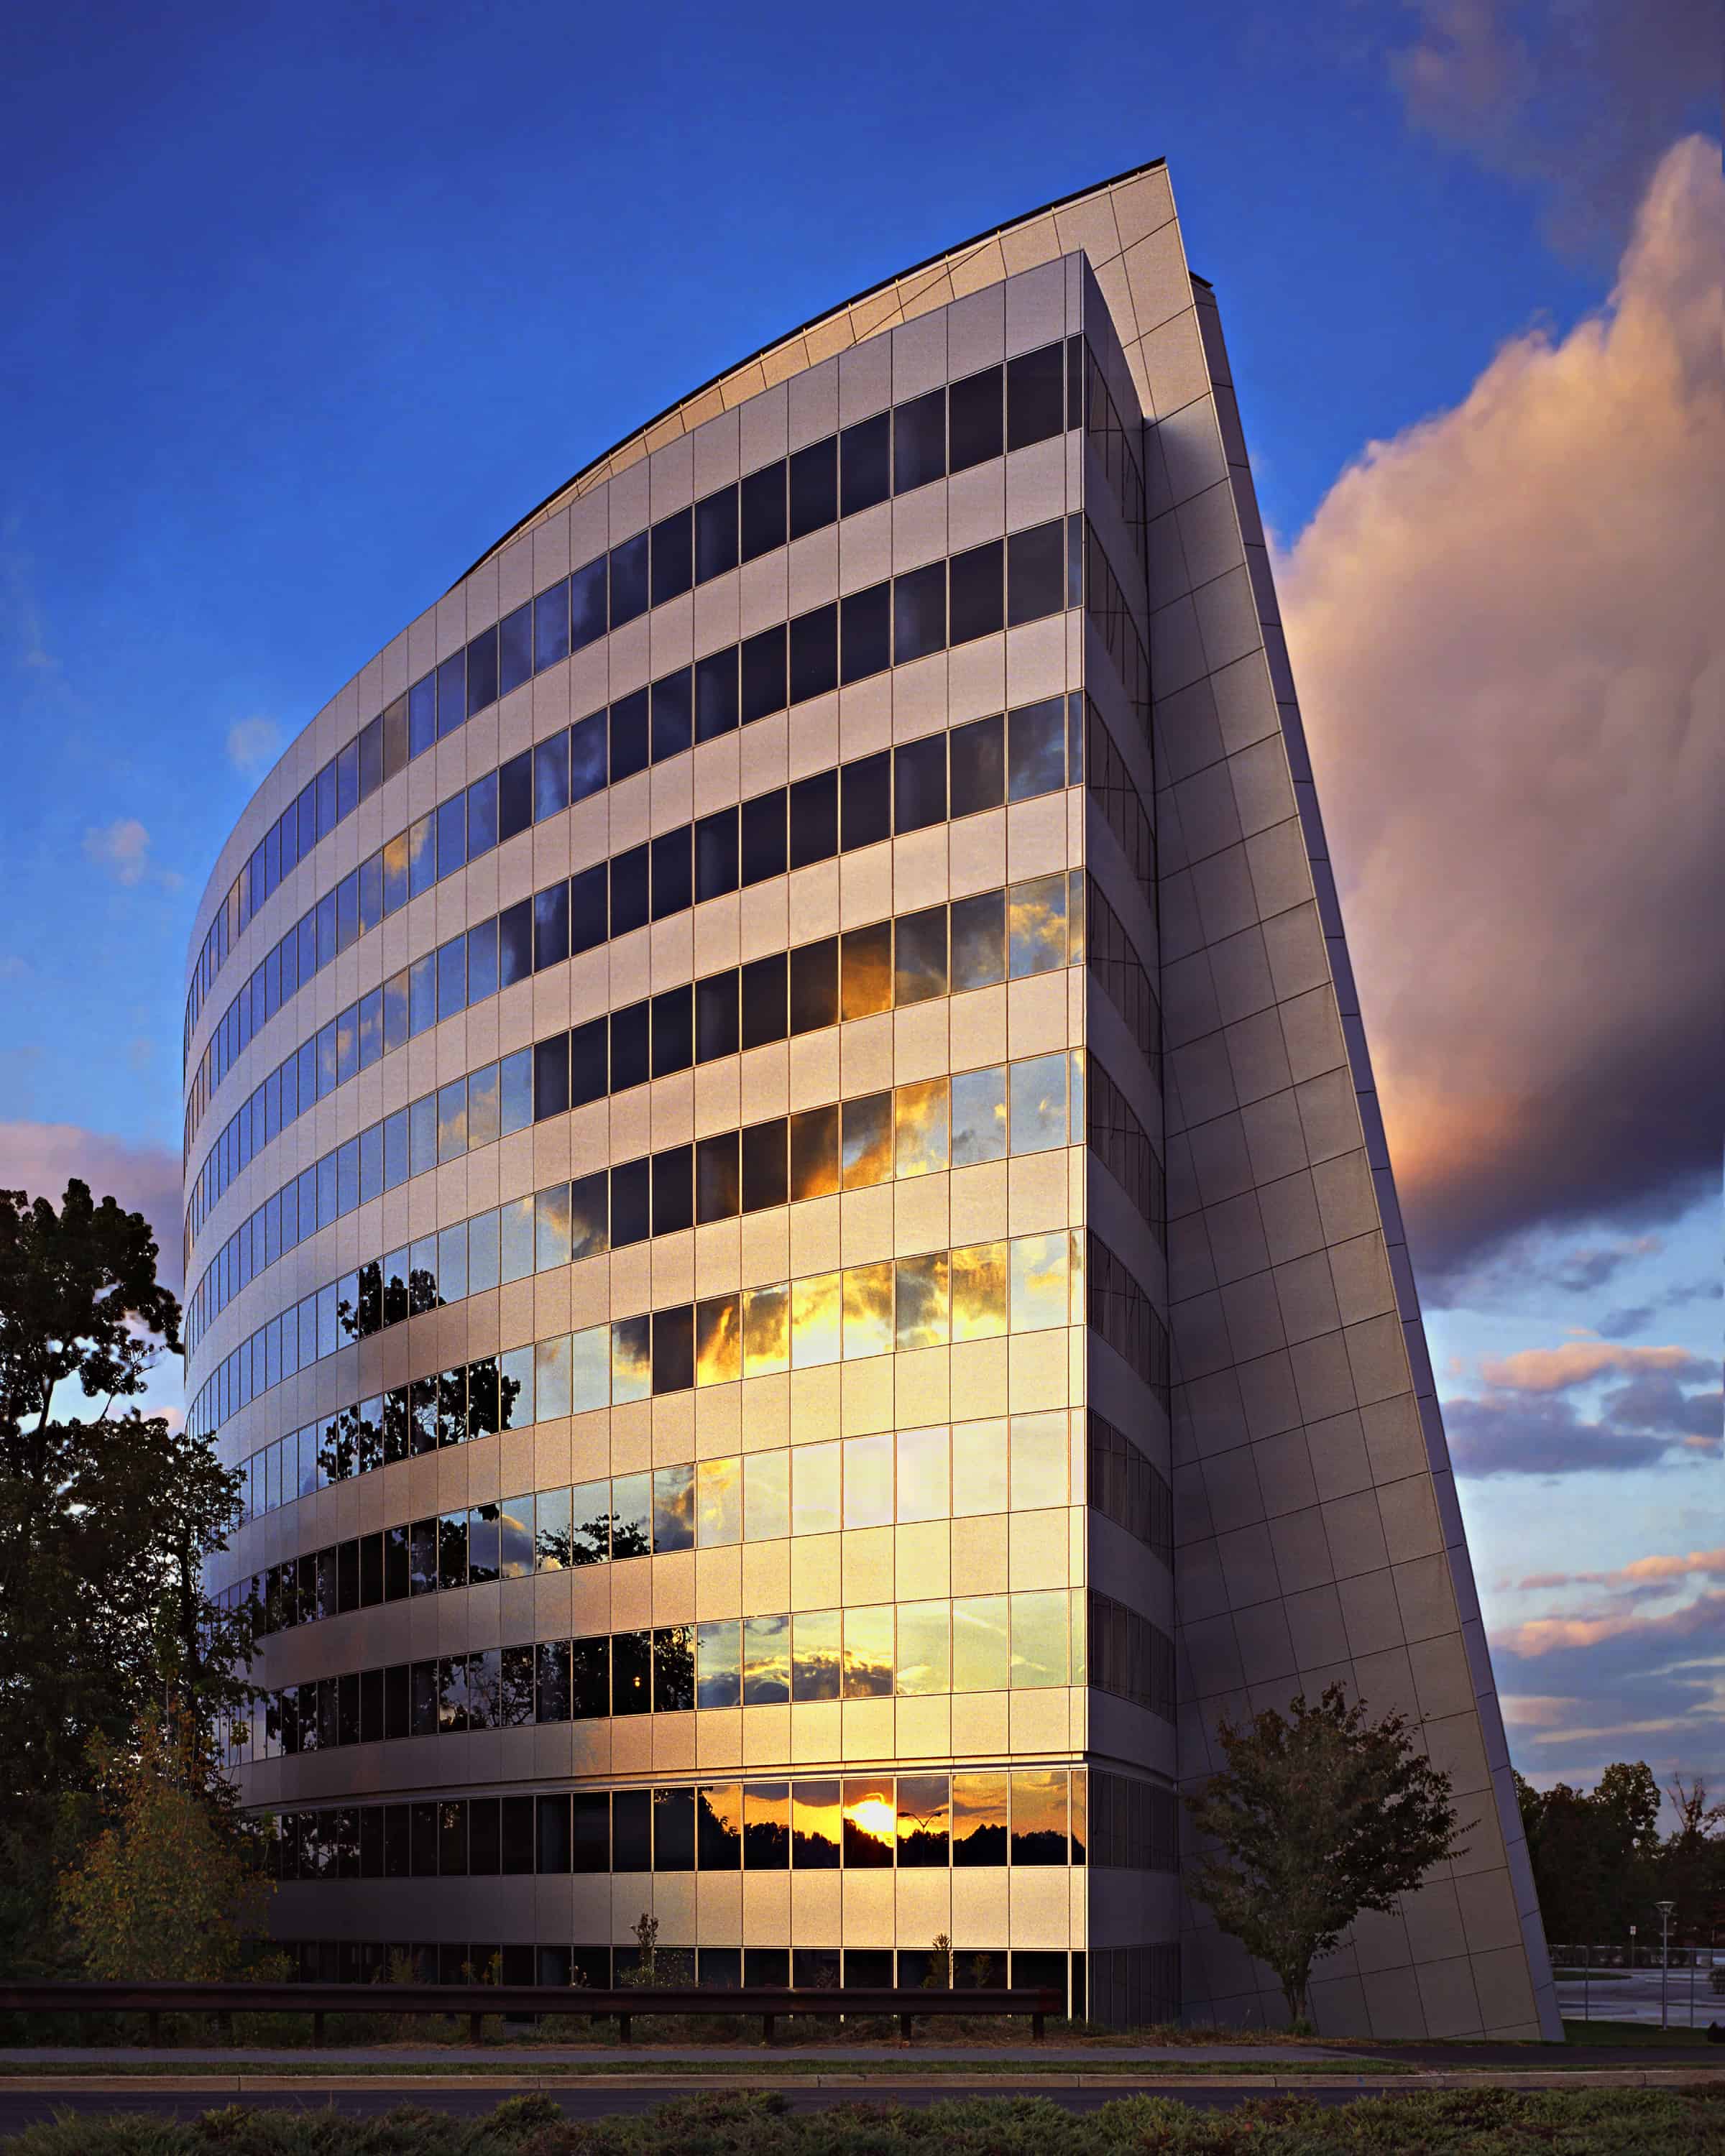 The Tower Building at 1101 Wootton Parkway in Rockville, Maryland, photo credit to Berner Sanker